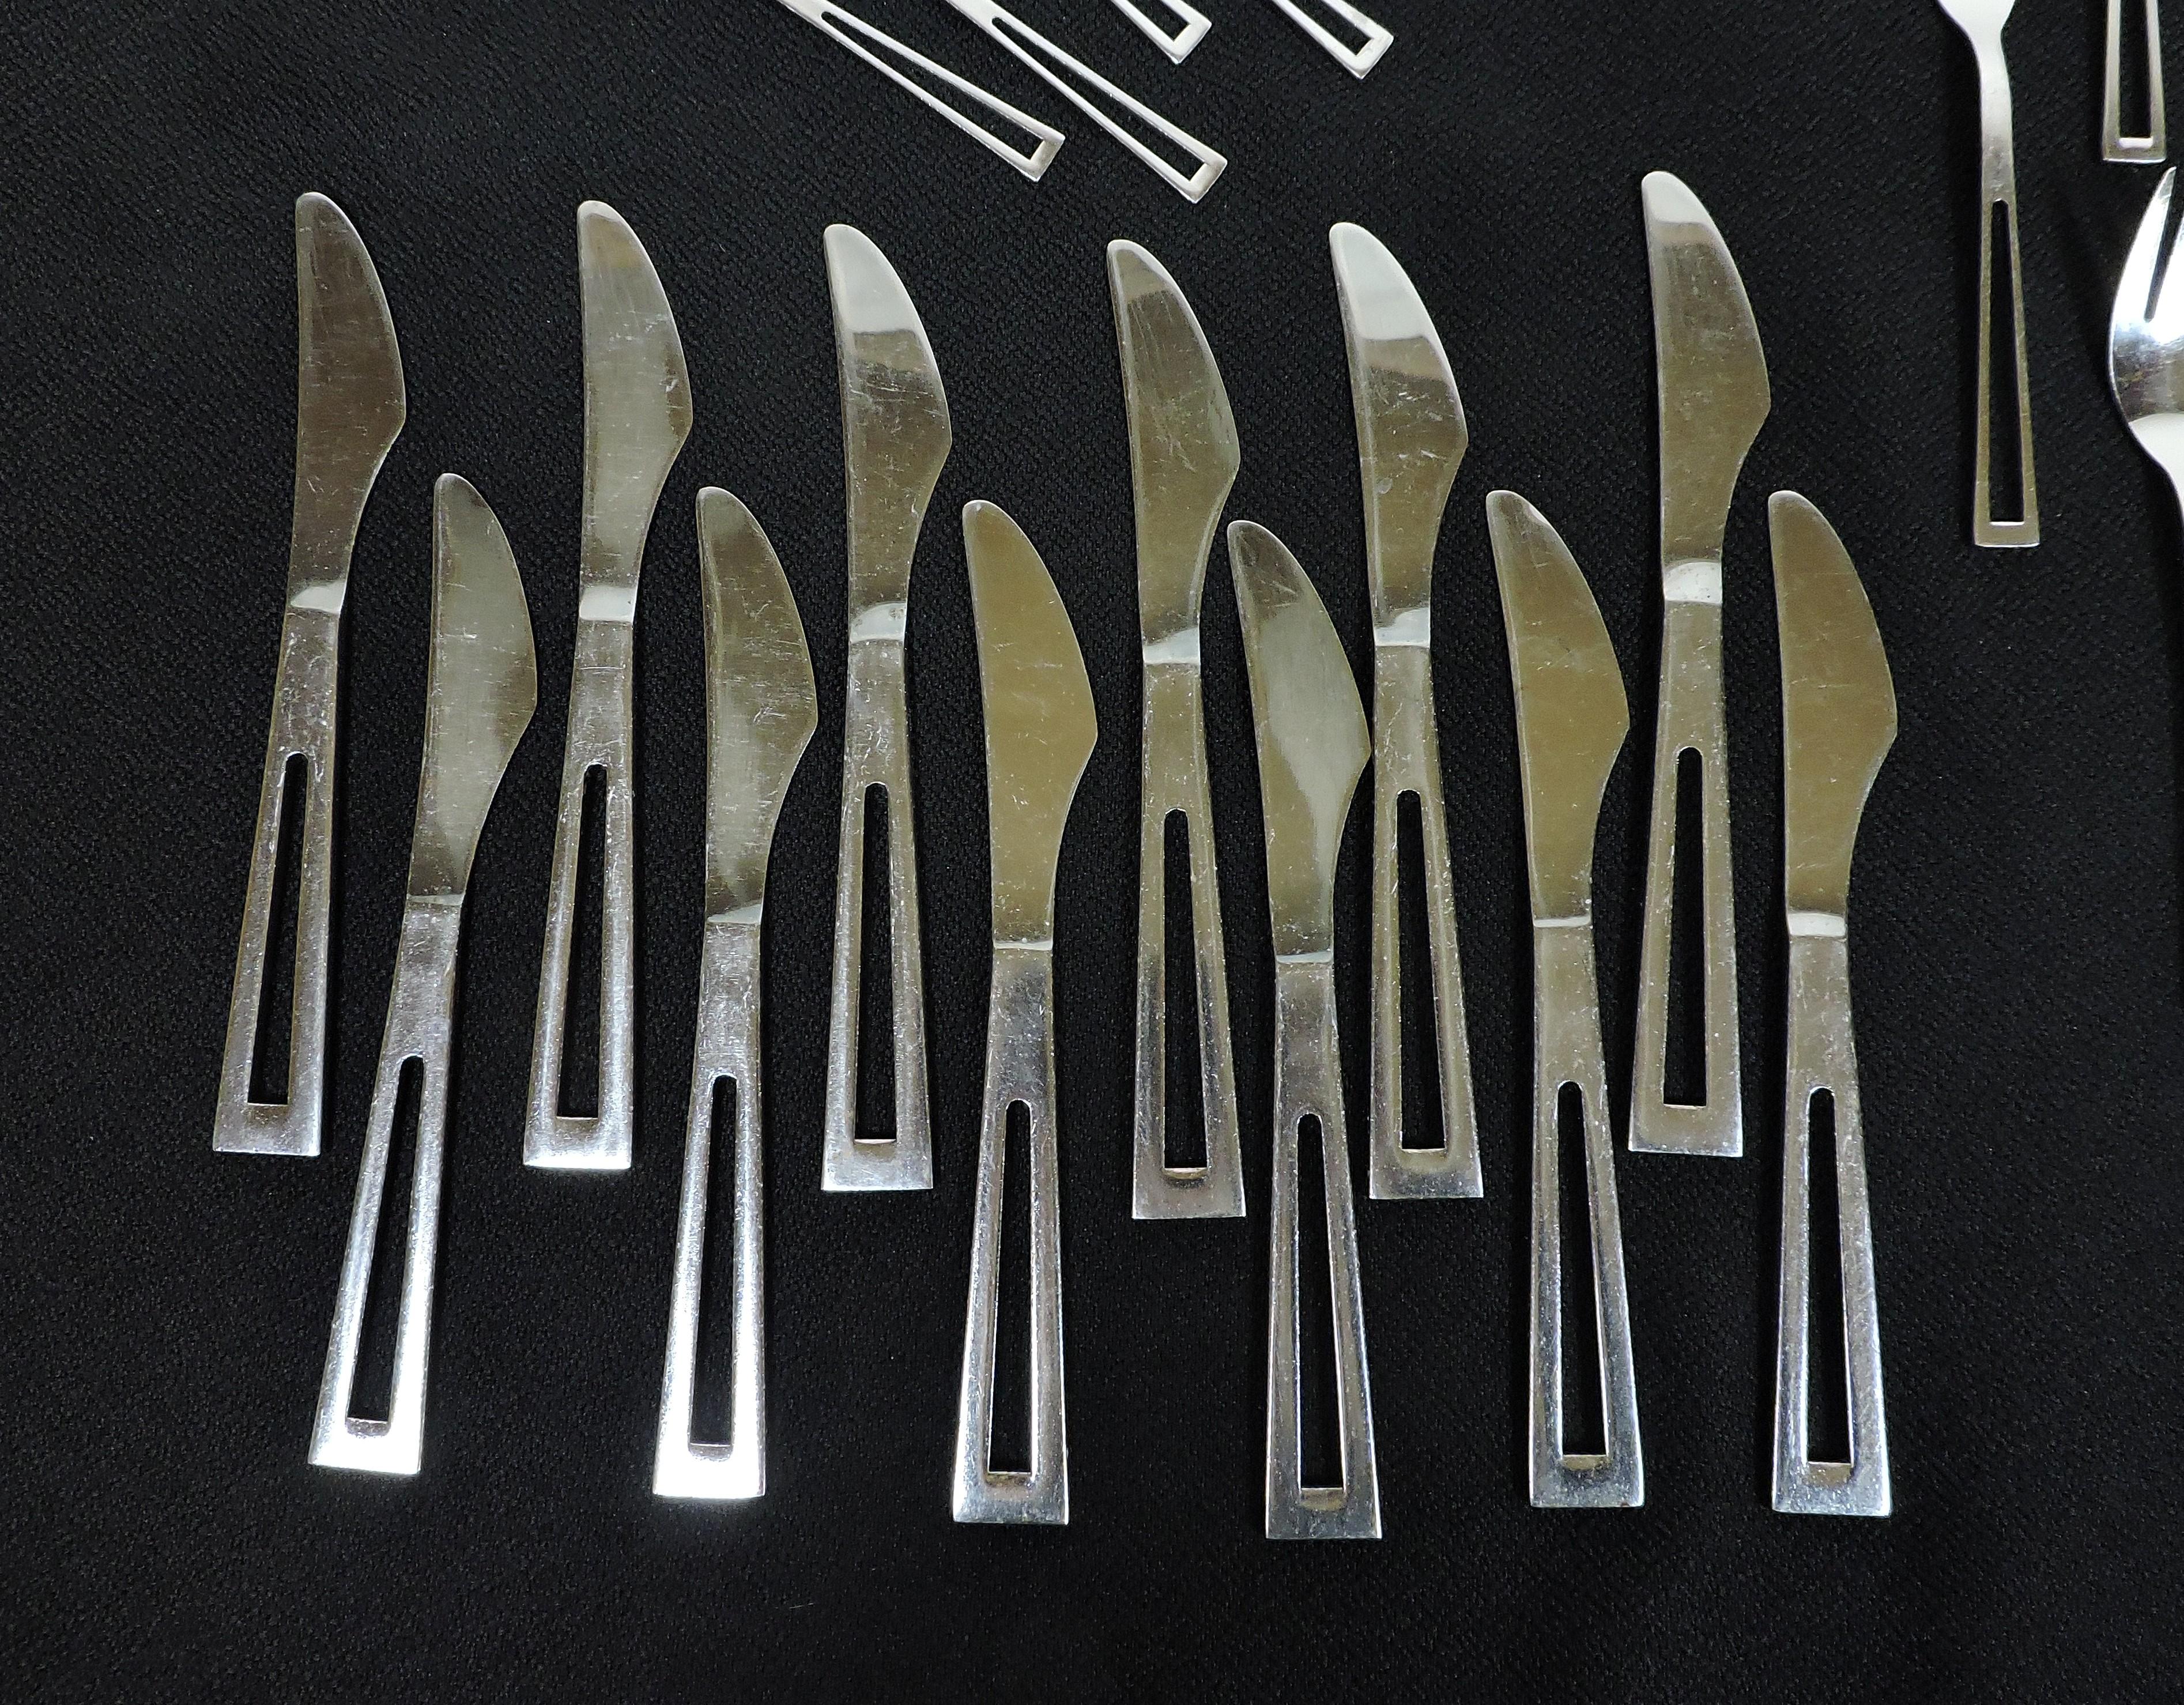 Late 20th Century Towle Aperto Avanti Celsa Style Mid-Century Modern Stainless Flatware for 12